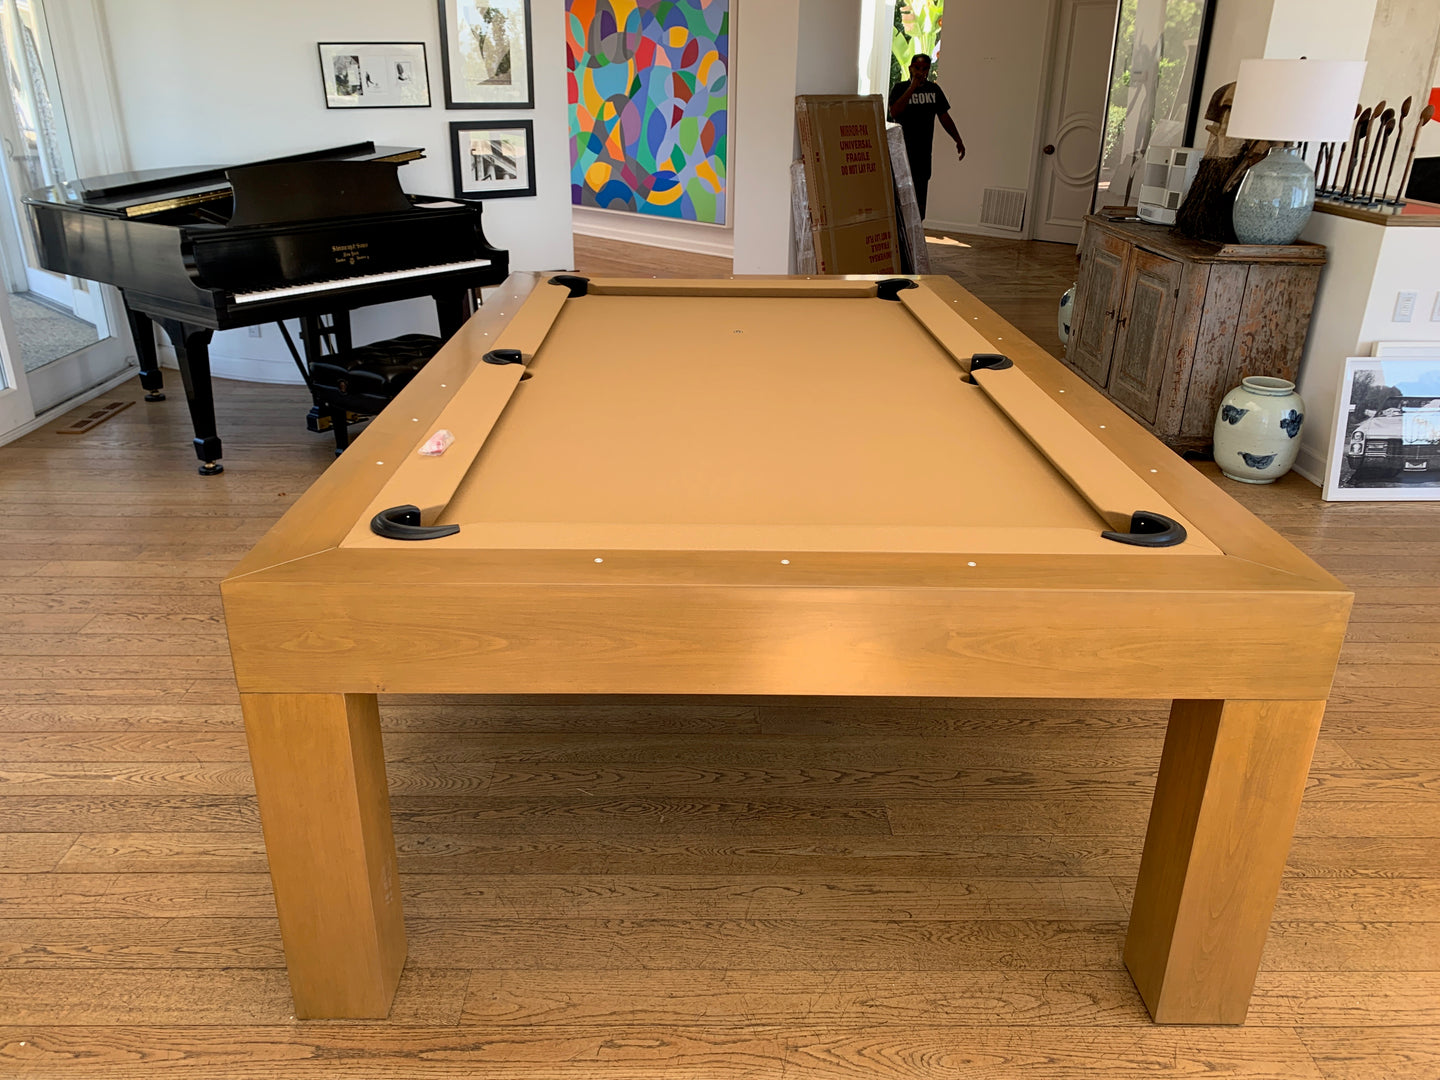 The Modern X19 Pool Table